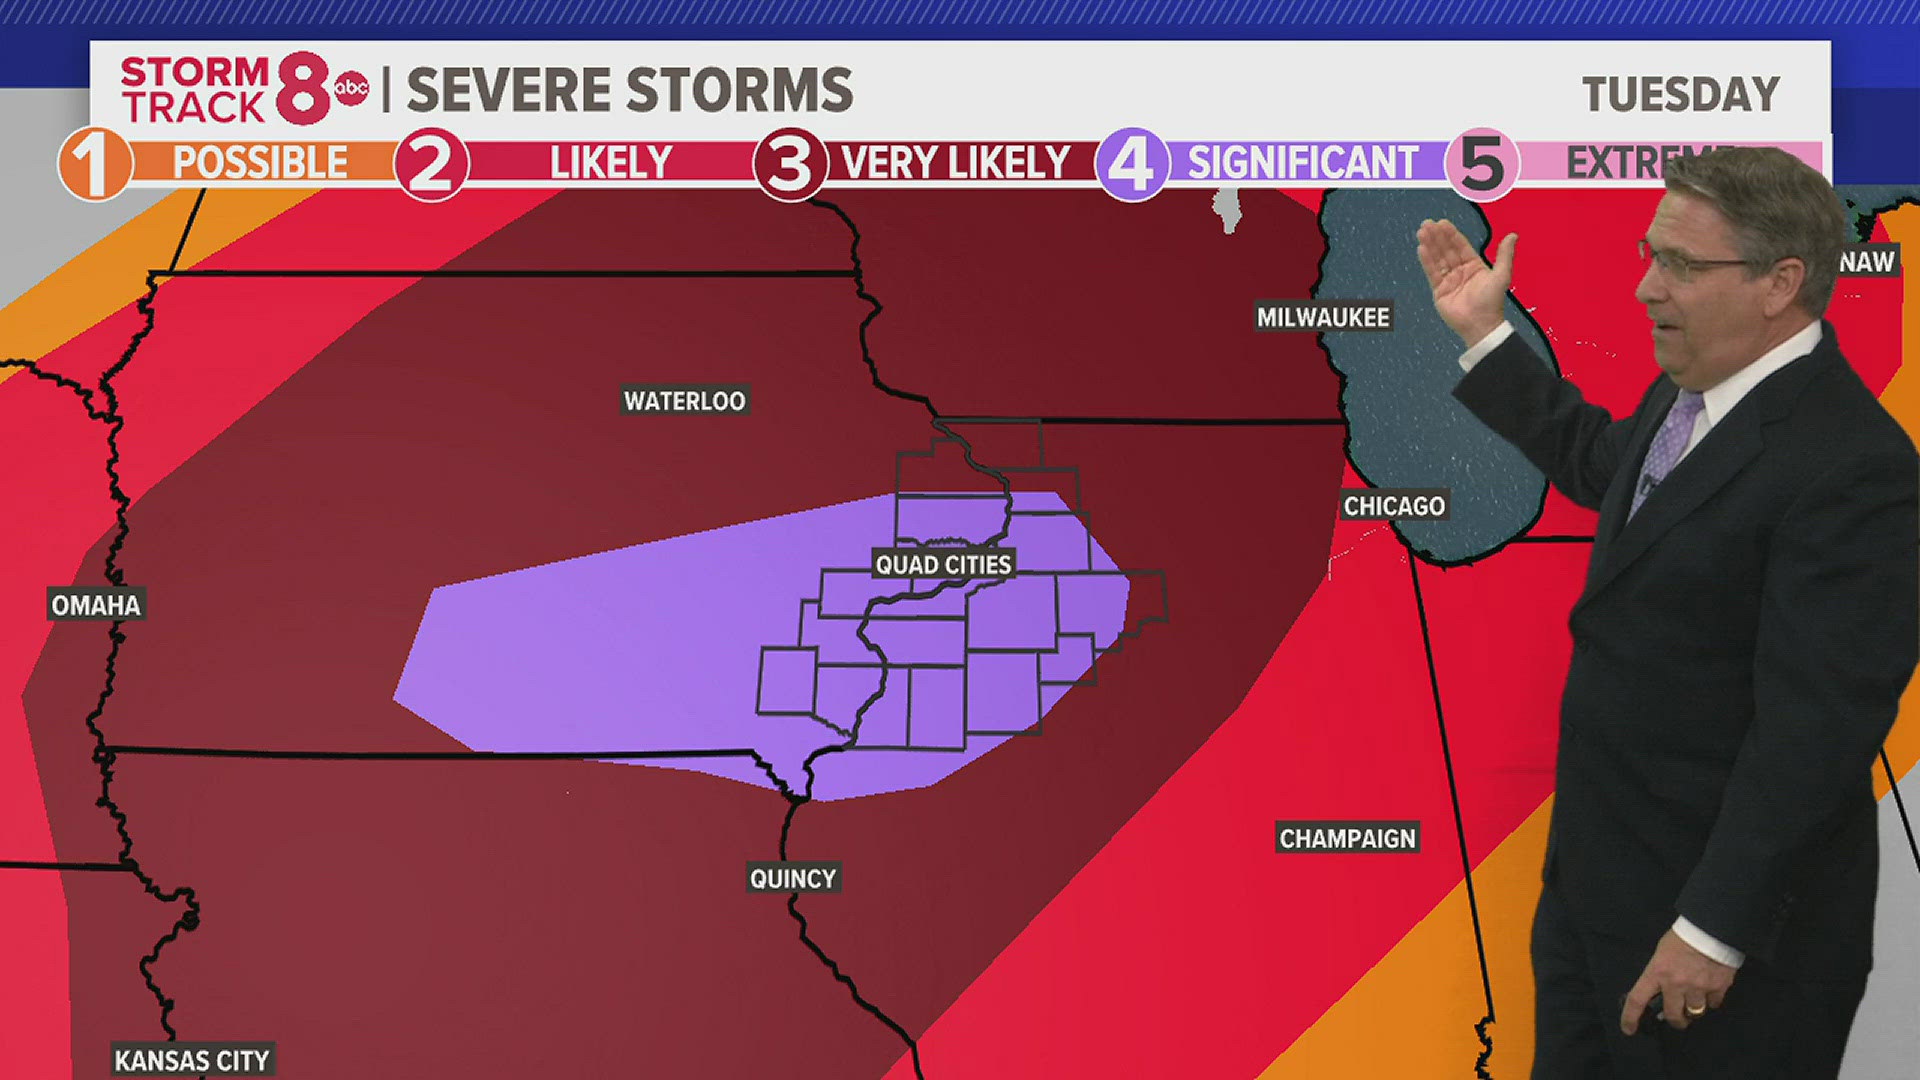 Severe weather still on track for Tuesday...Several waves expected